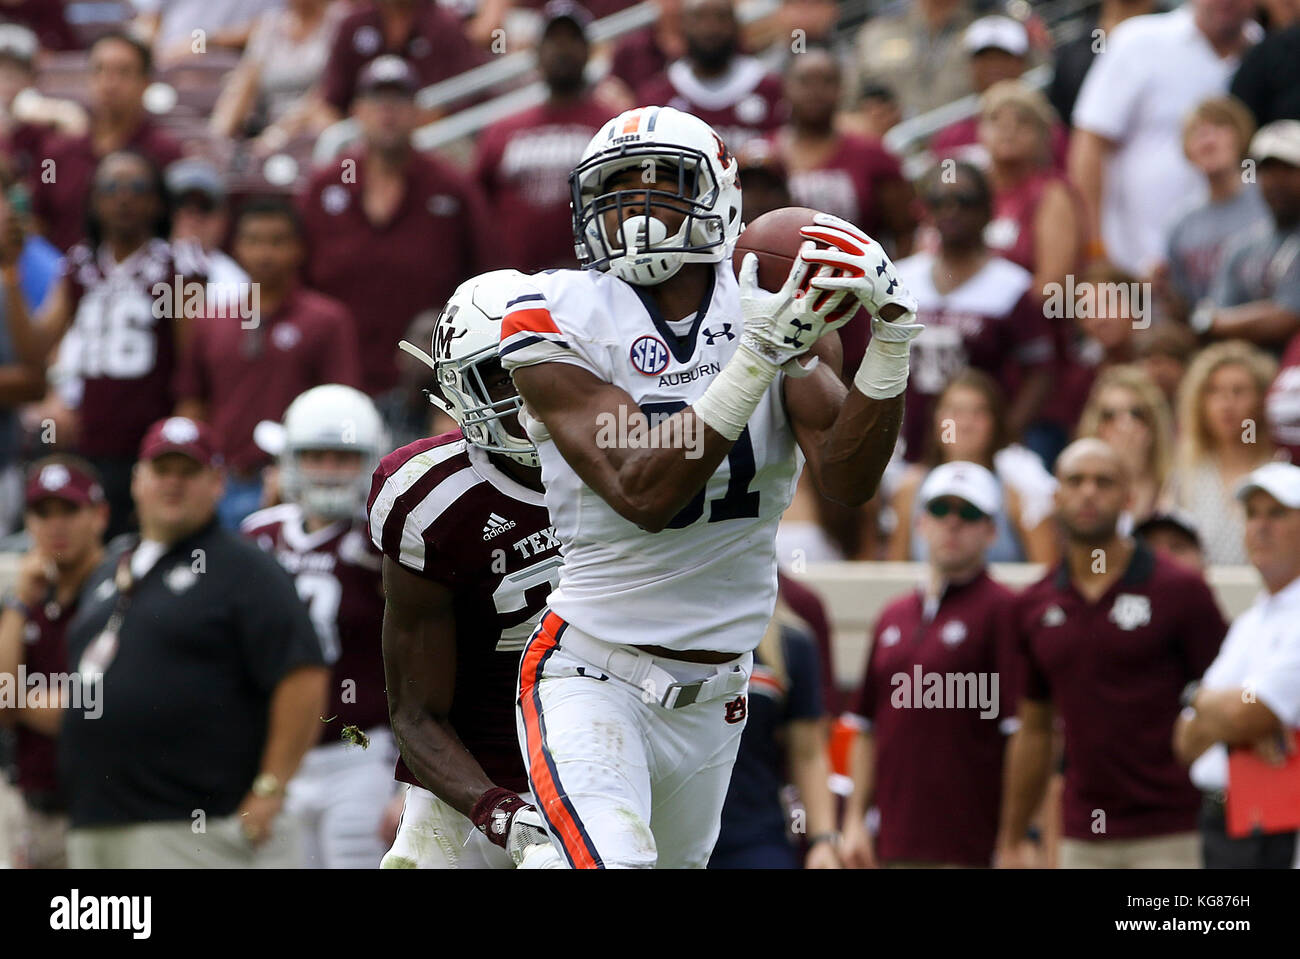 November 4, 2017: Auburn Tigers wide receiver Darius Slayton (81) catches a 53 yard touchdown pass in the second quarter during the NCAA football game between the Auburn Tigers and the Texas A&M Aggies at Kyle Field in College Station, TX; John Glaser/CSM. Stock Photo